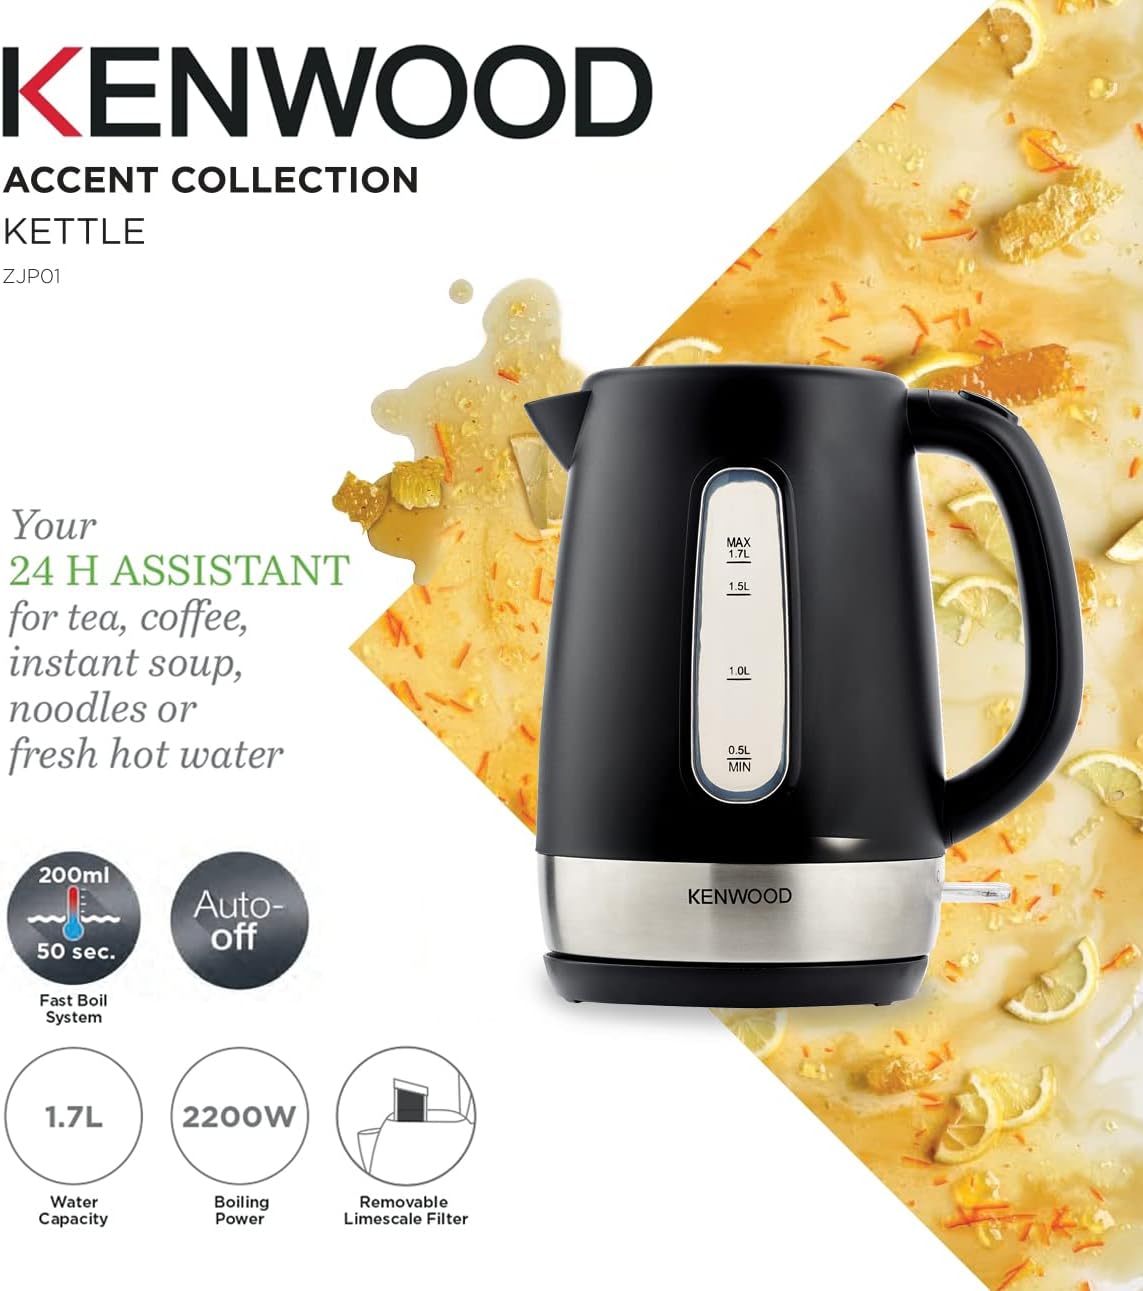 Kenwood Kettle 1.7L Cordless Electric Kettle 2200W with Auto Shut-Off & Removable Mesh Filter ZJP01.A0BK Black/Silver